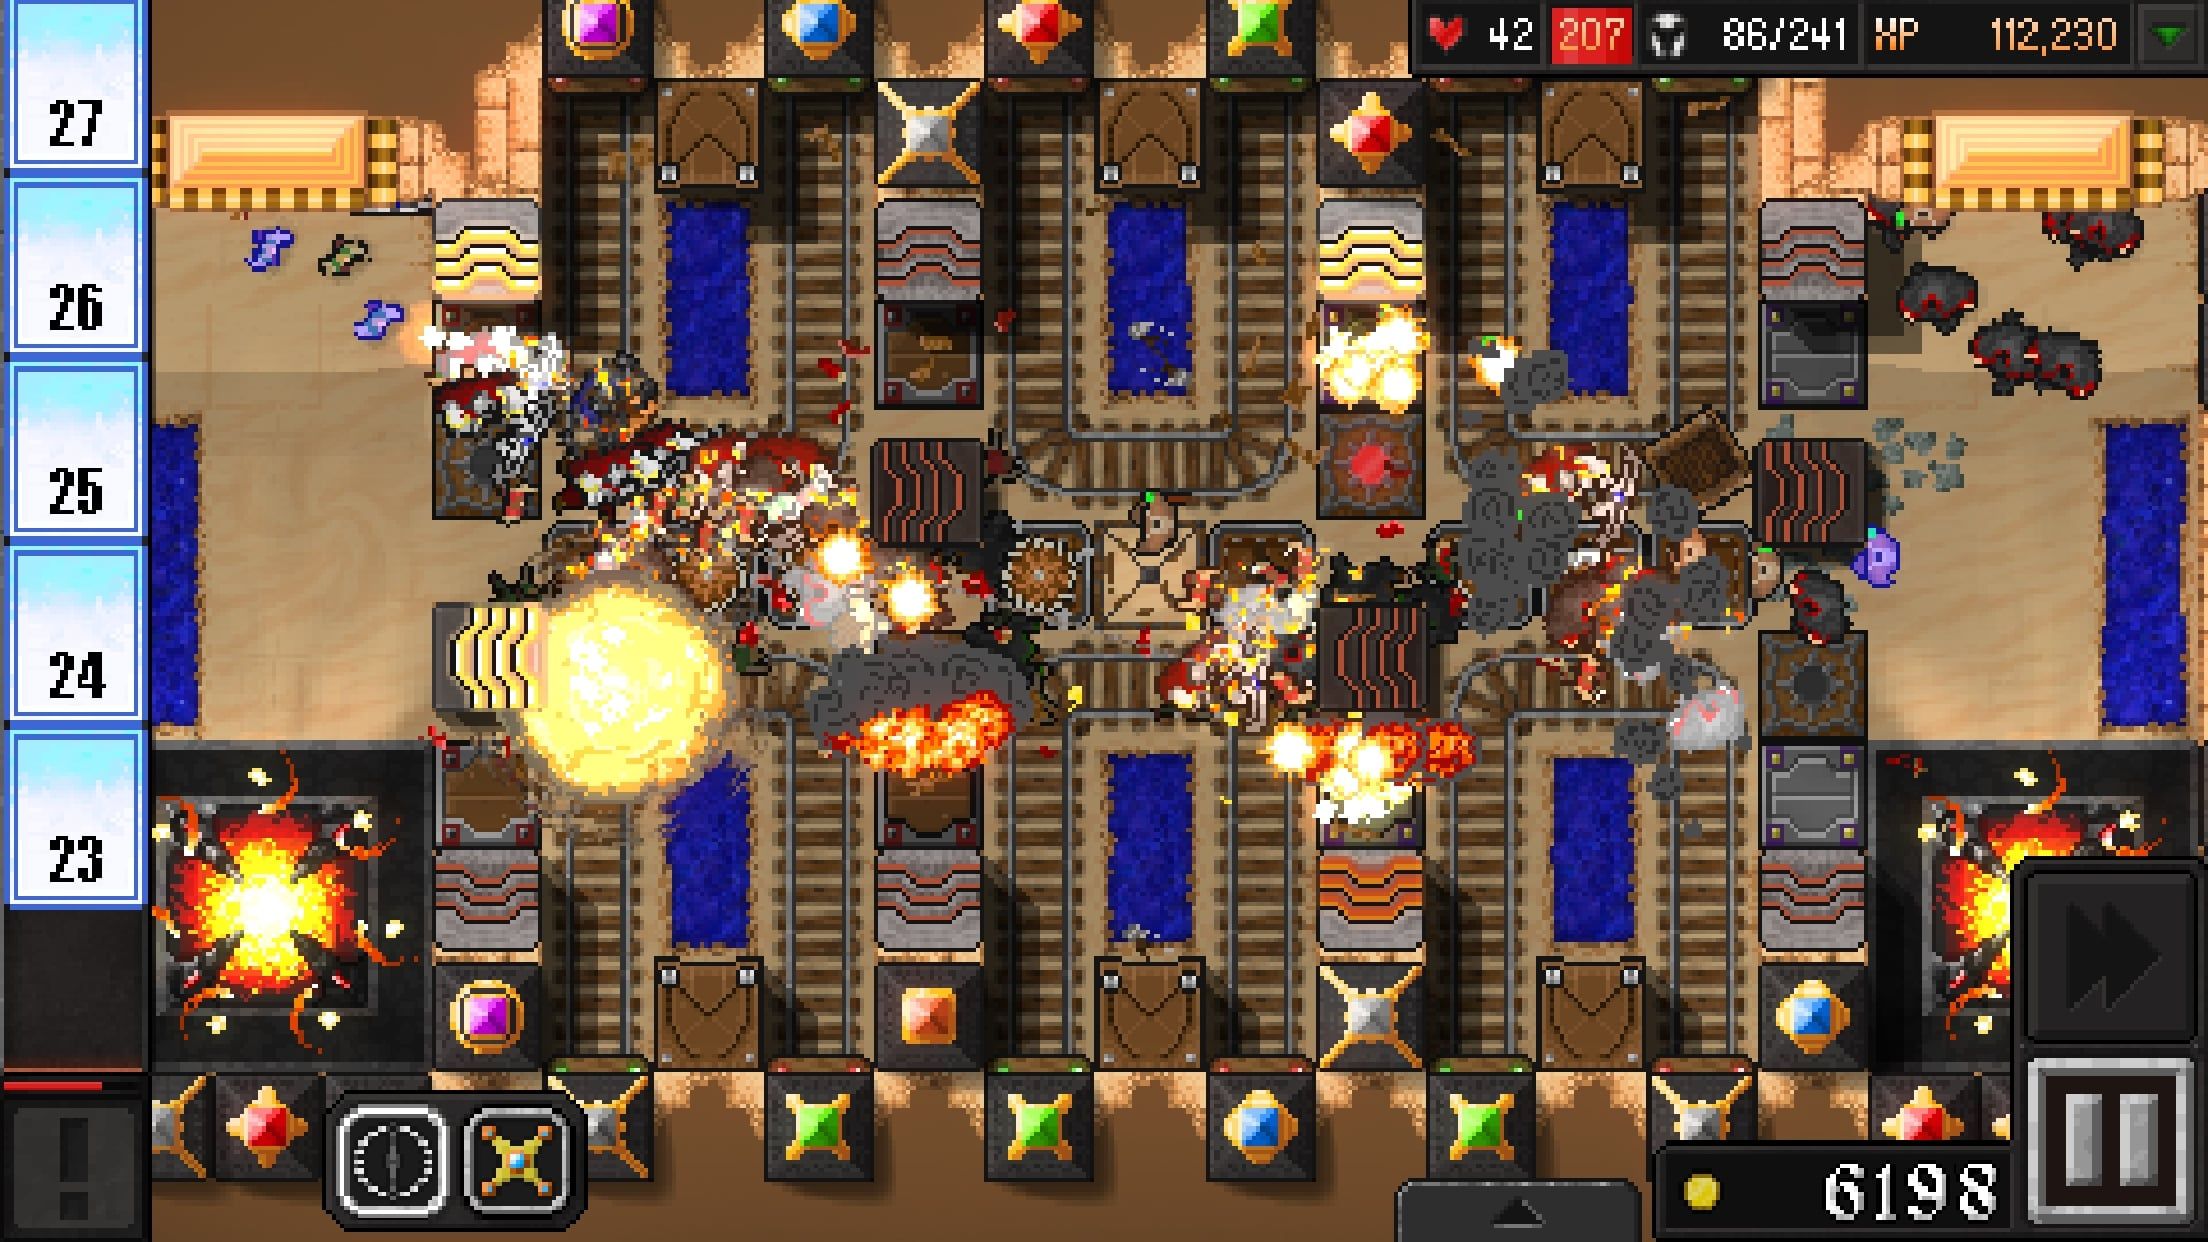 best-tower-defense-games-on-android-dungeon-warfare-2-6198-gold